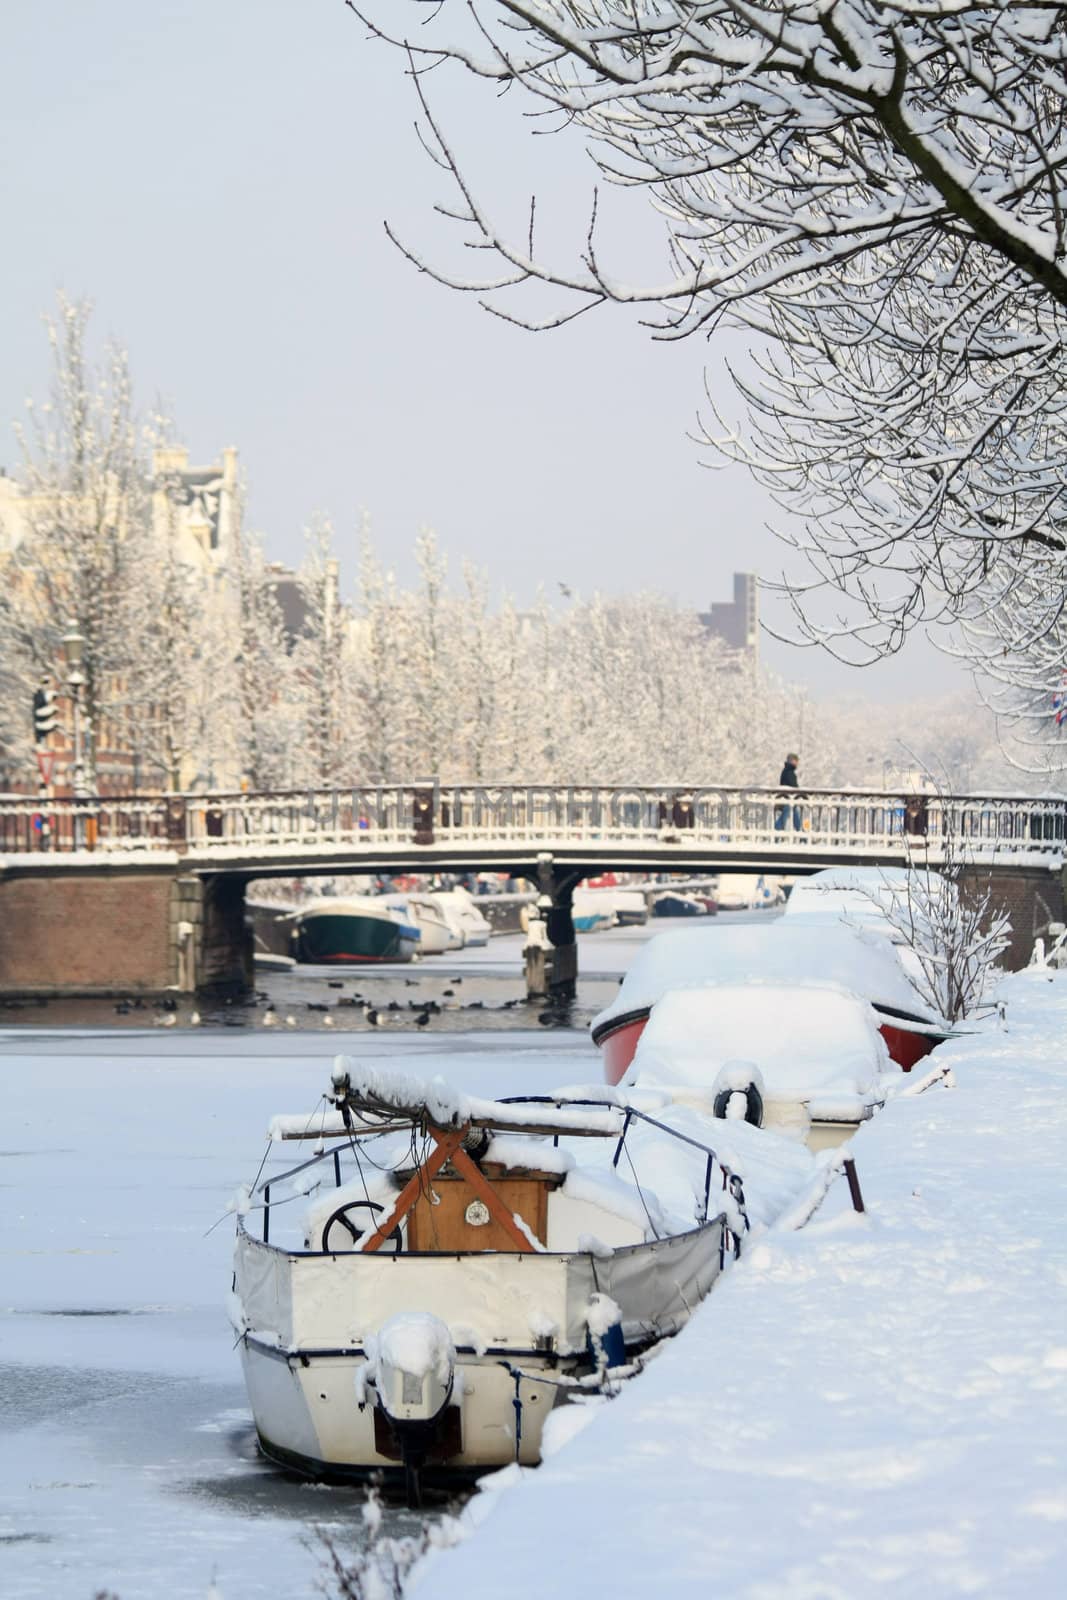 A frozen canal with snow coverd boats in Haarlem, Holland